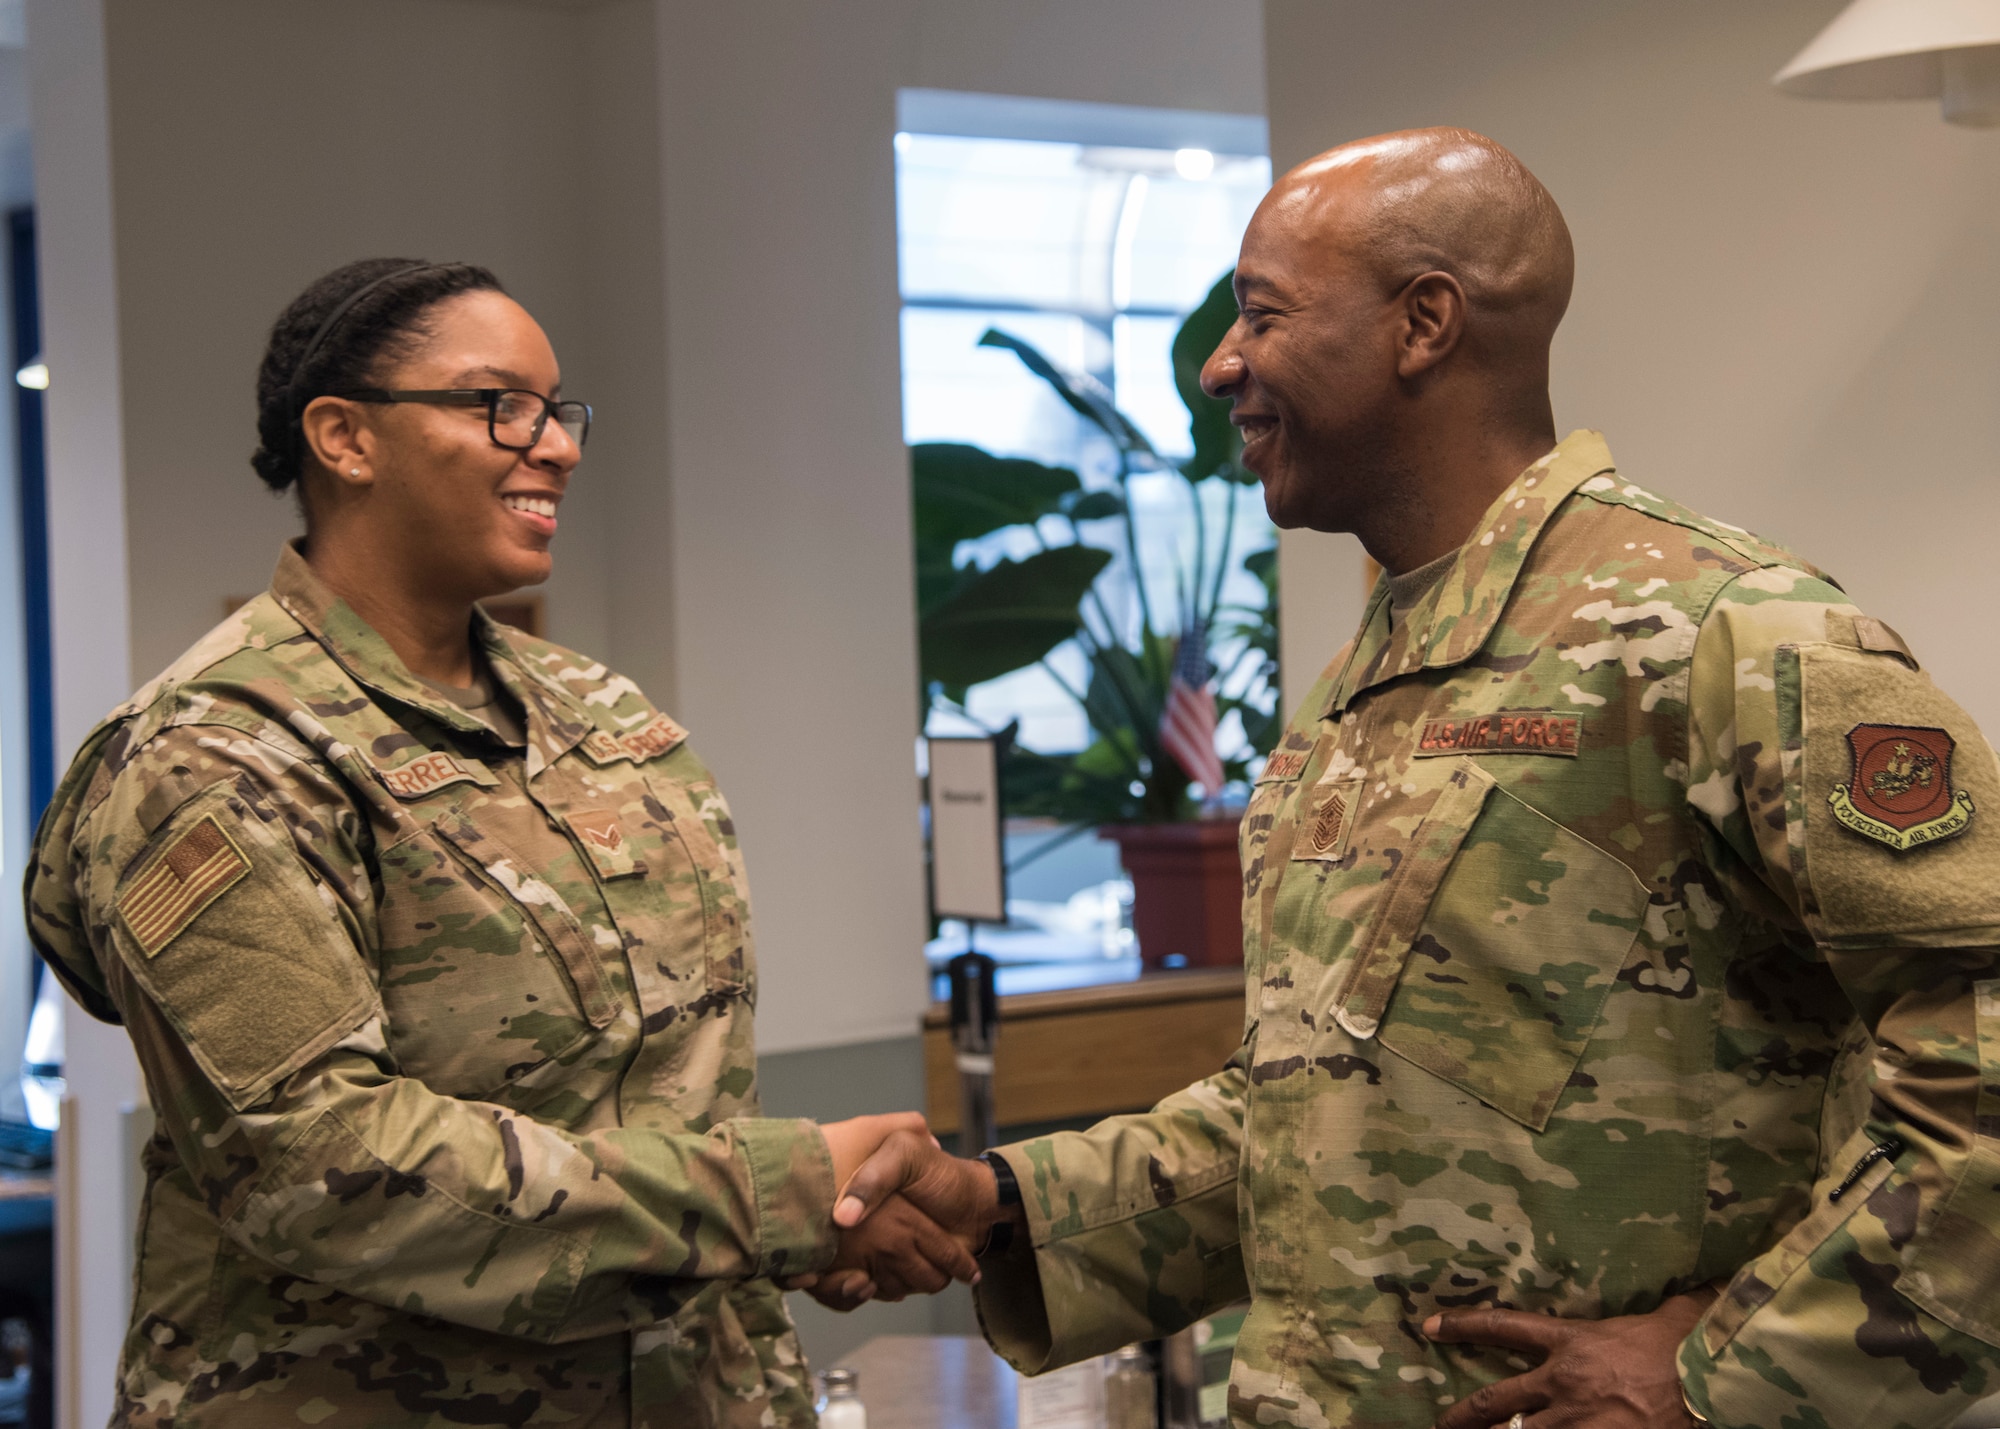 Chief Master Sergeant of the Air Force Kaleth O. Wright presents a coin to Senior Airman Kayla Terrell, 30th Comptroller Squadron financial operations technician, at Breakers Dining Facility, Sept. 25, 2019 at Vandenberg Air Force Base, Calif. Wright began his visit with a breakfast where he met with Airmen to learn their personal stories and their outlooks on the Air Force. (U.S. Air Force photo by Airman 1st Class Aubree Milks)